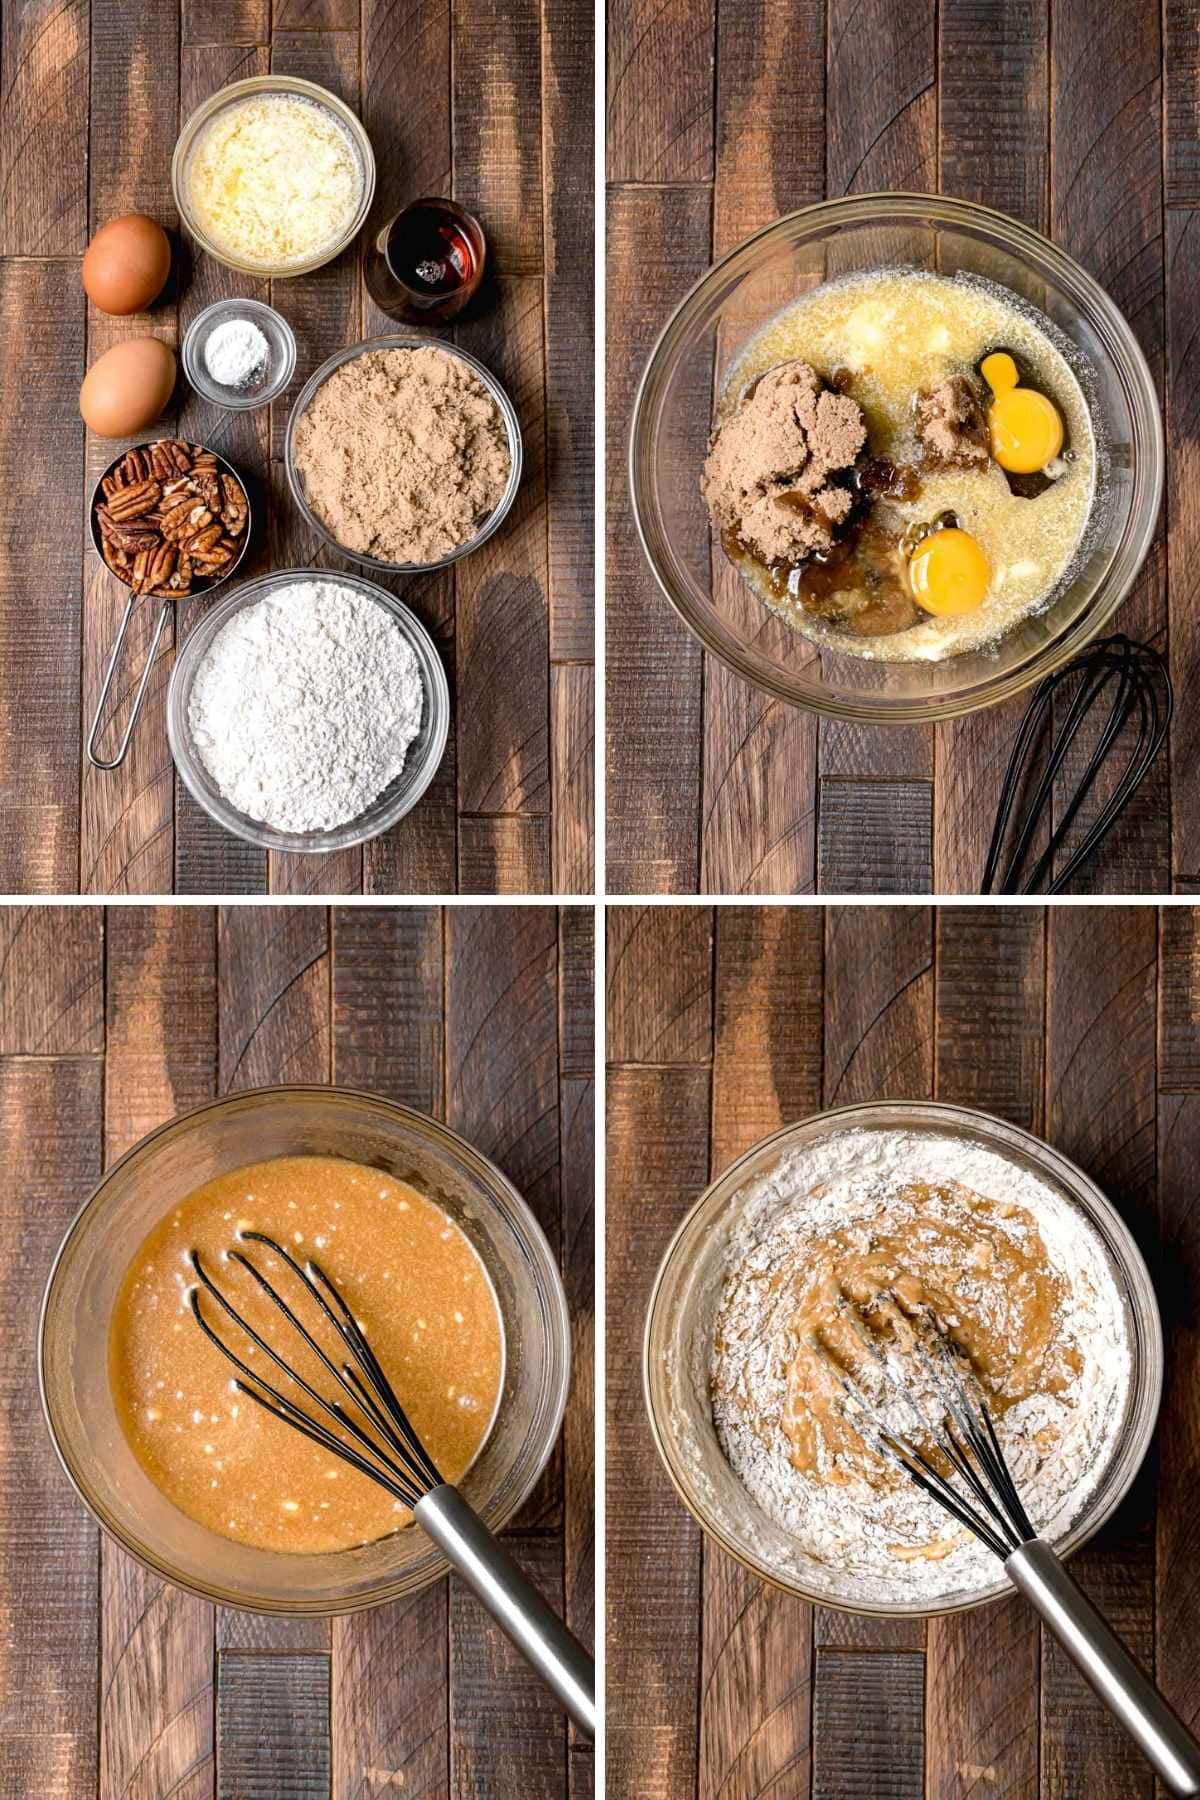 Collage showing ingredients and steps to make Maple Pecan Bars.